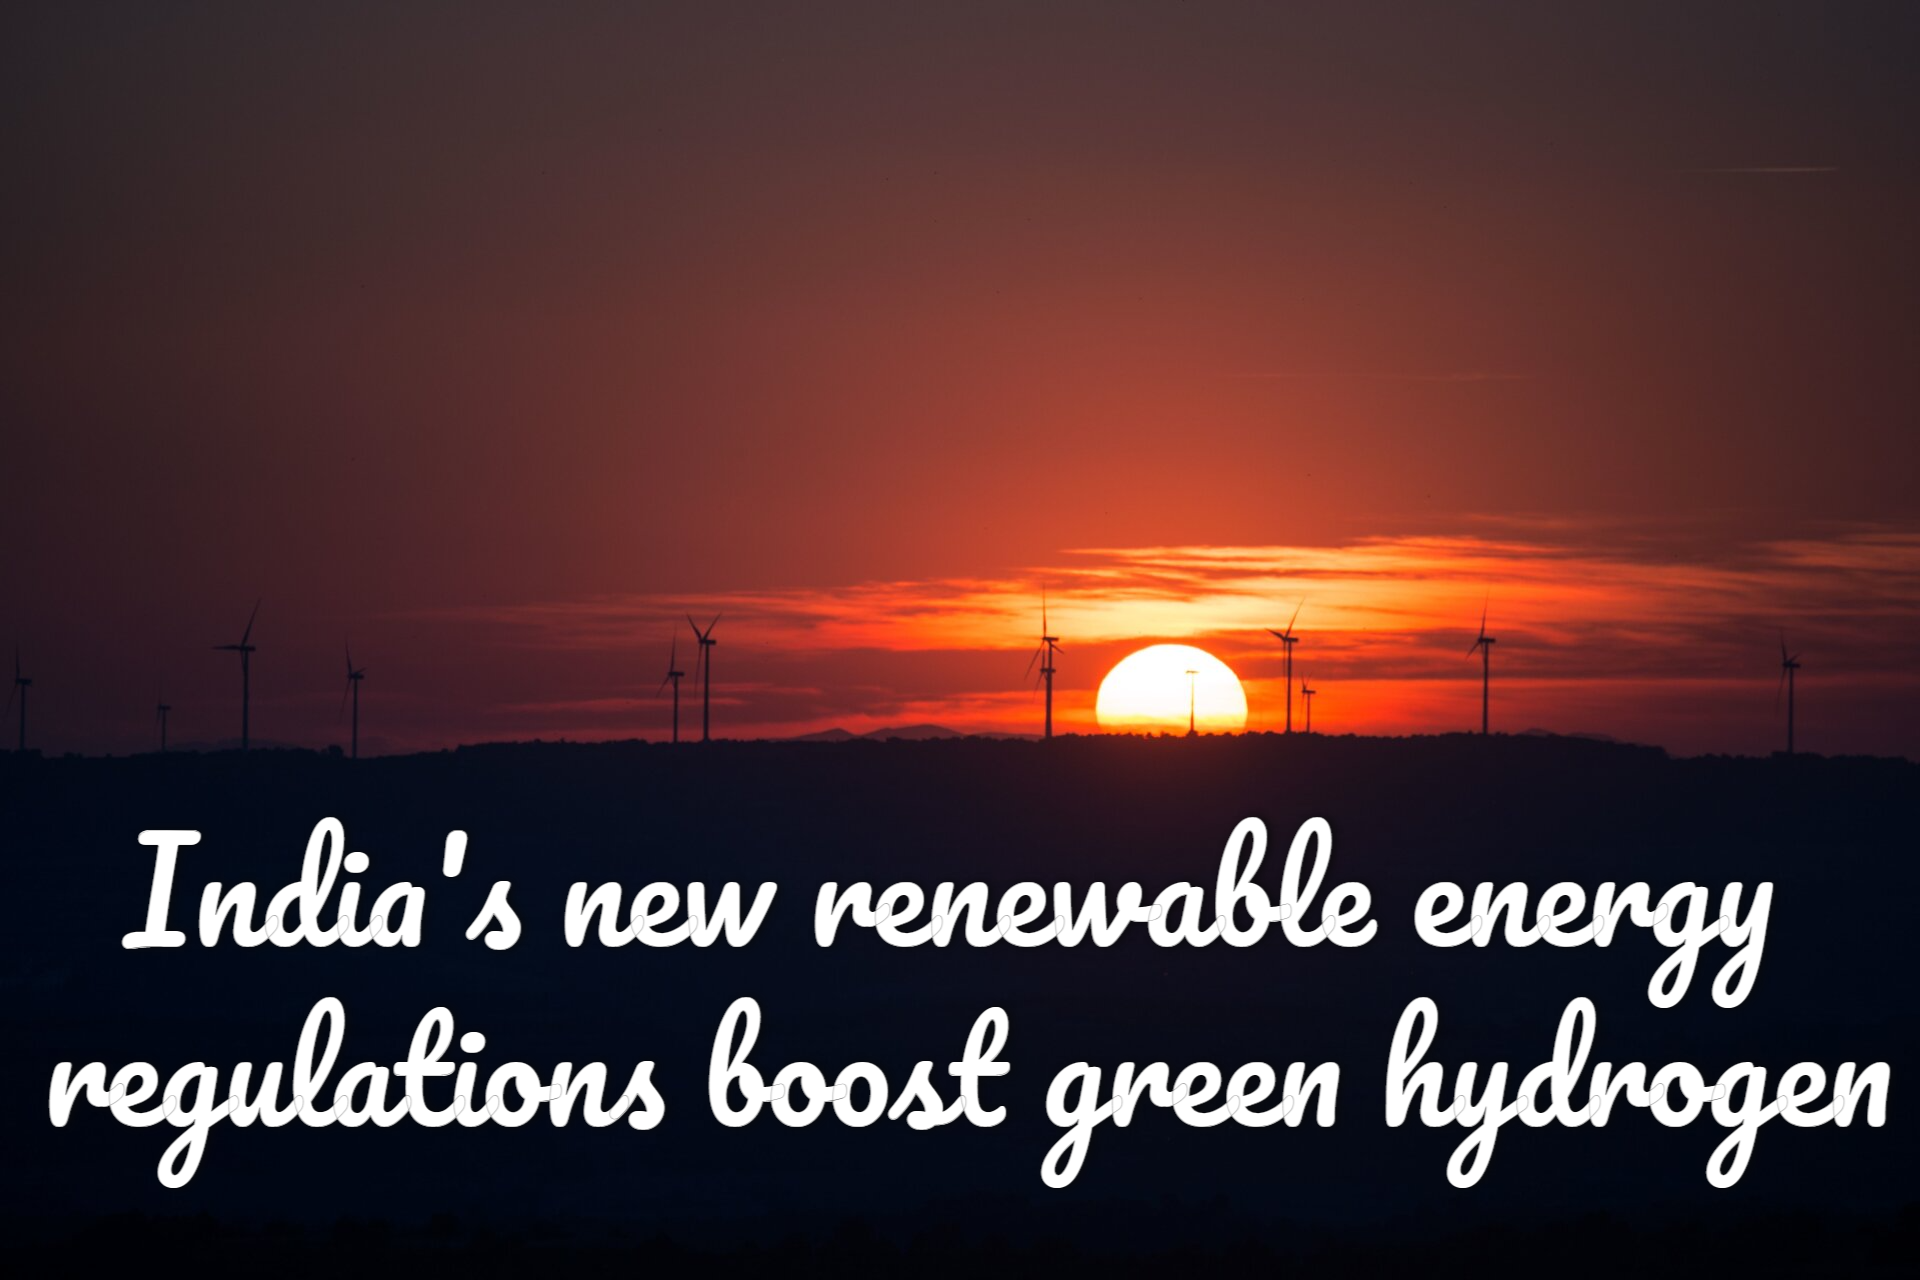 India’s proposed new renewable energy rules give green hydrogen another boost